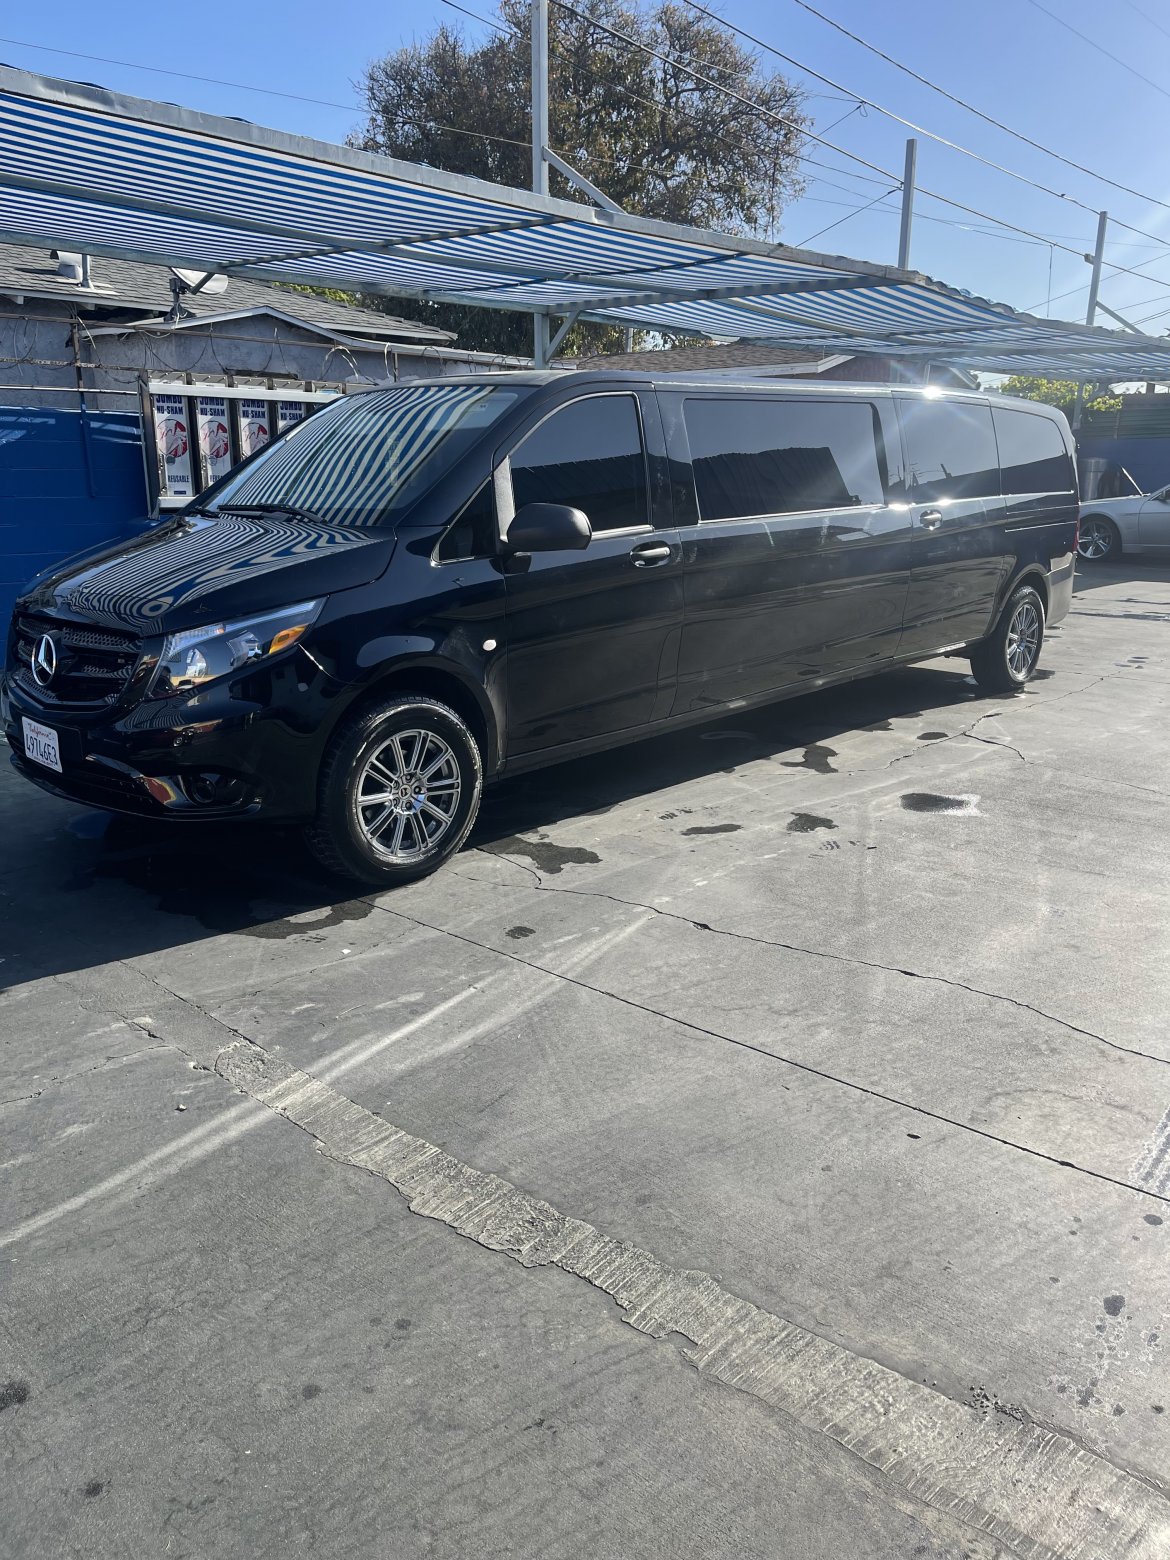 Sprinter for sale: 2019 Mercedes-Benz Metris by Springfield coach limo